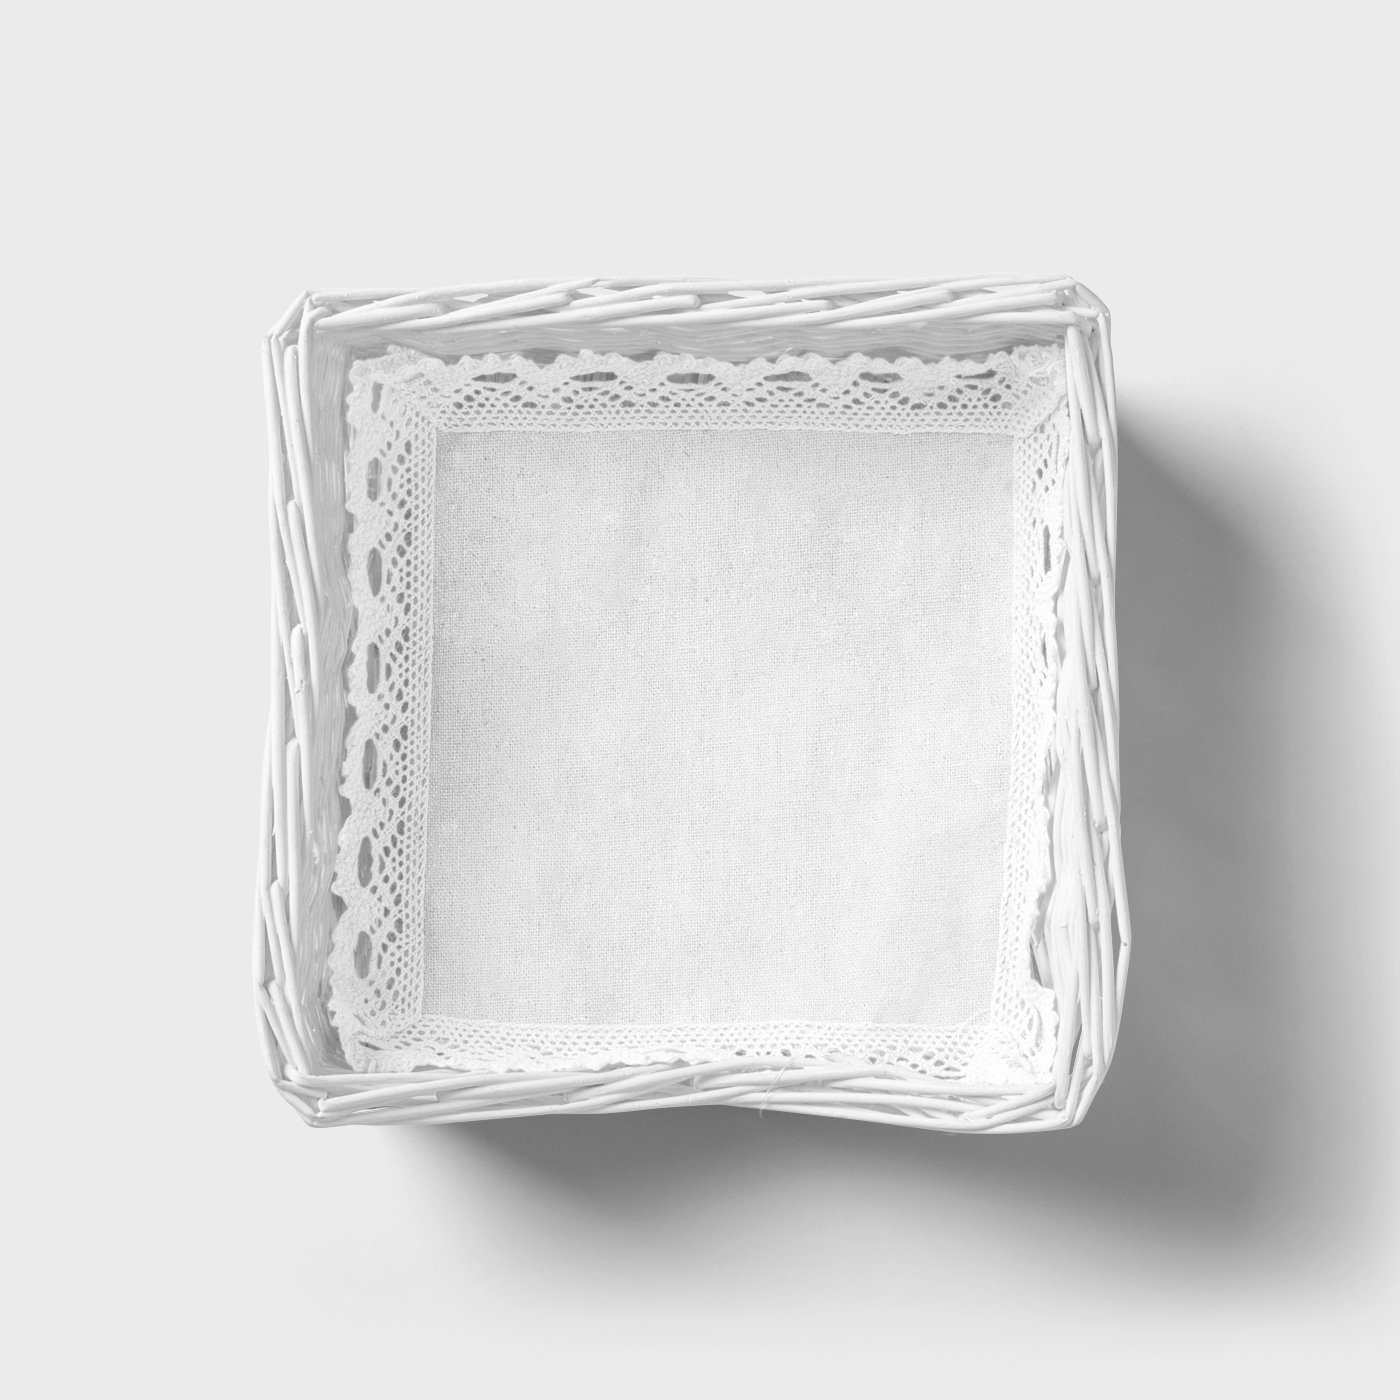 Top View of Square Basket Mockup FREE PSD